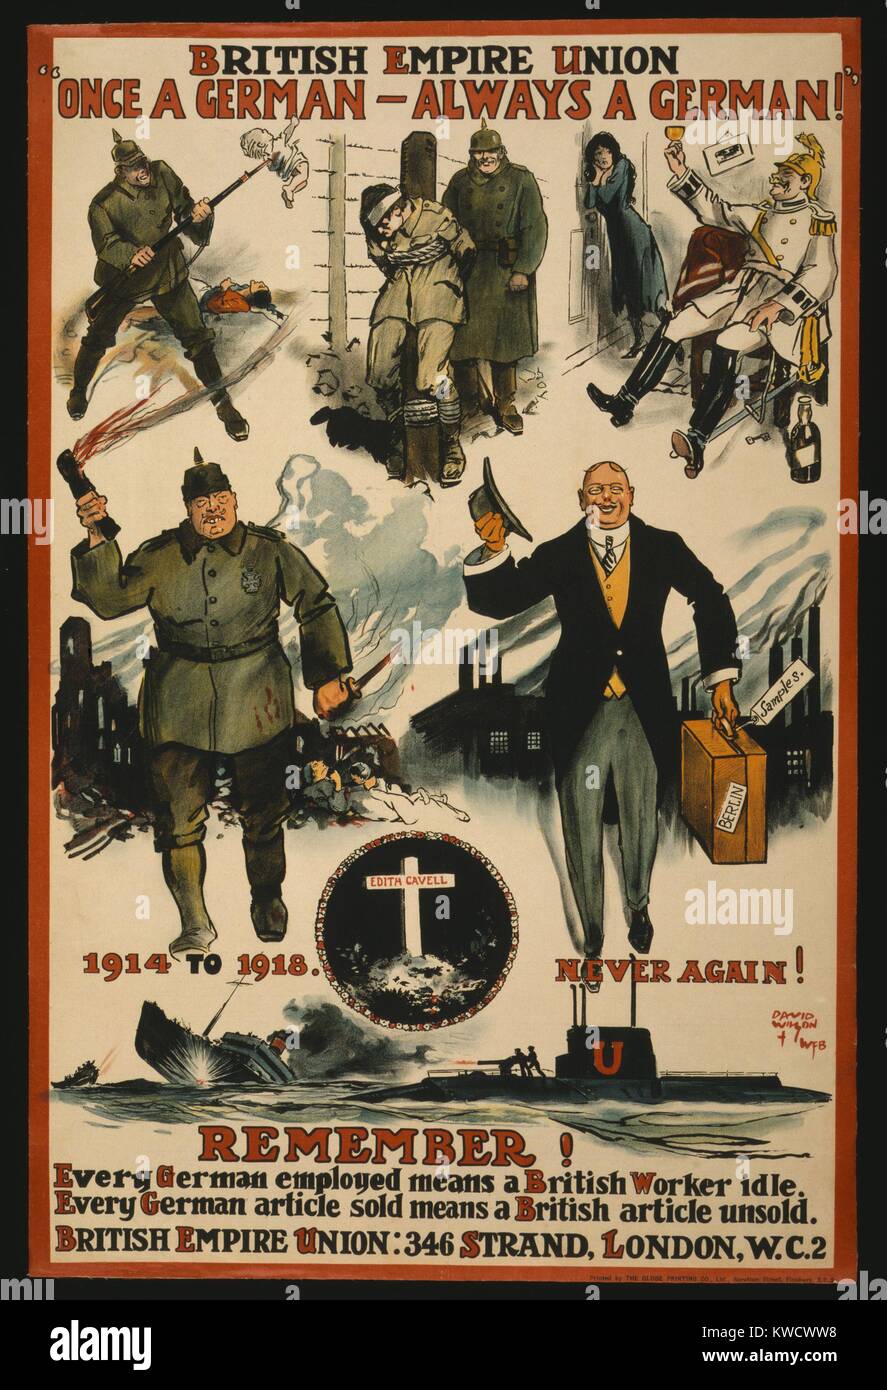 Virulent anti-German World War 1 poster by the British Empire Union, 1918. Formerly named the Anti-German Union, it was imperialist, anti-socialist, protectionist, and Anglophile (BSLOC 2017 1 33) Stock Photo